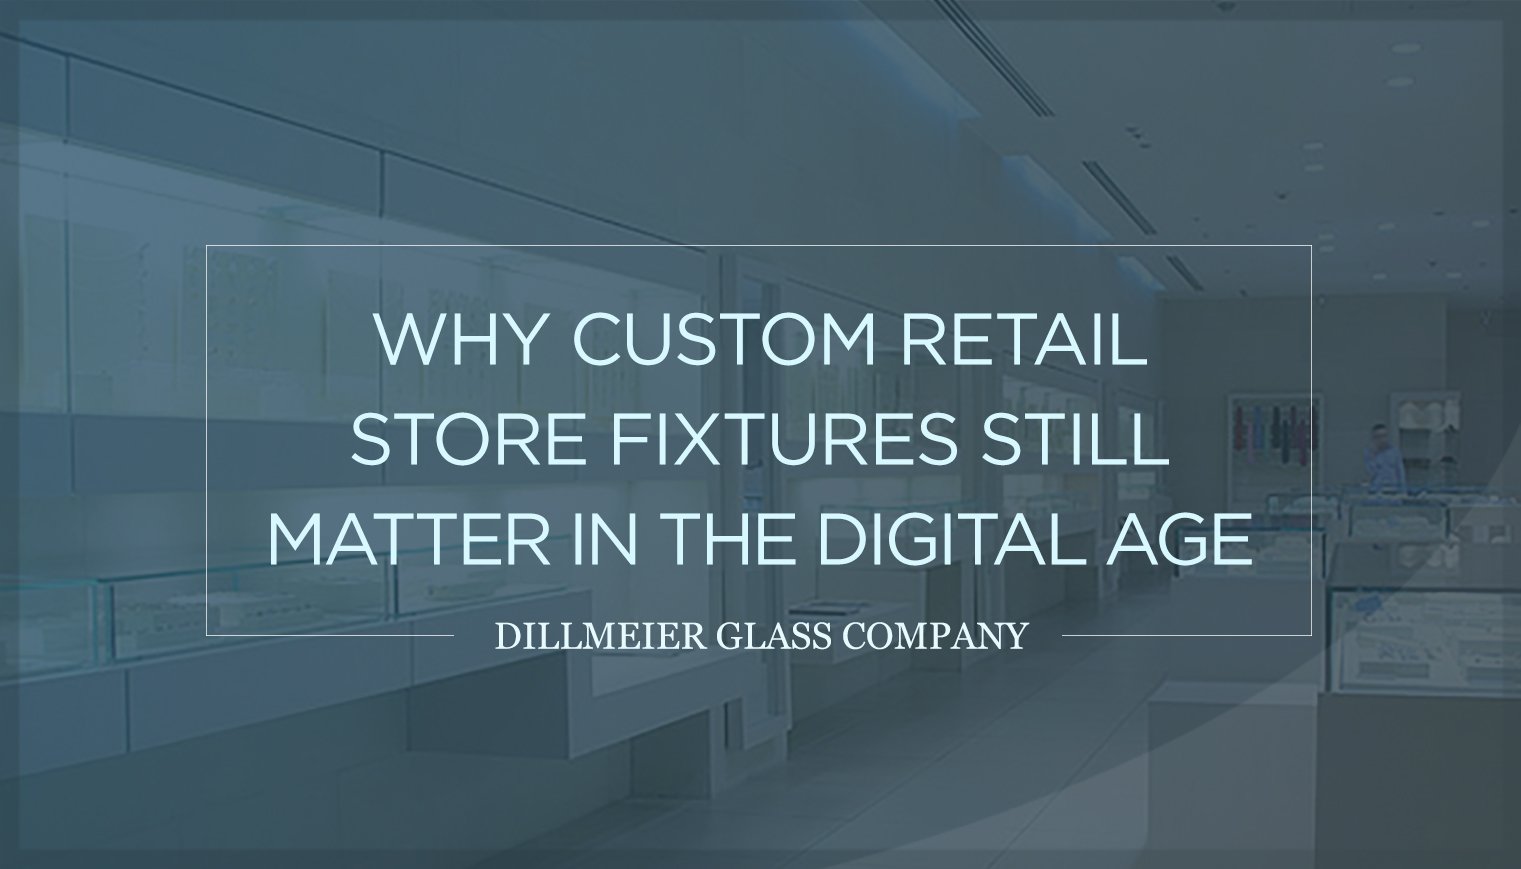 Why Custom Retail Store Fixtures Still Matter in the Digital Age